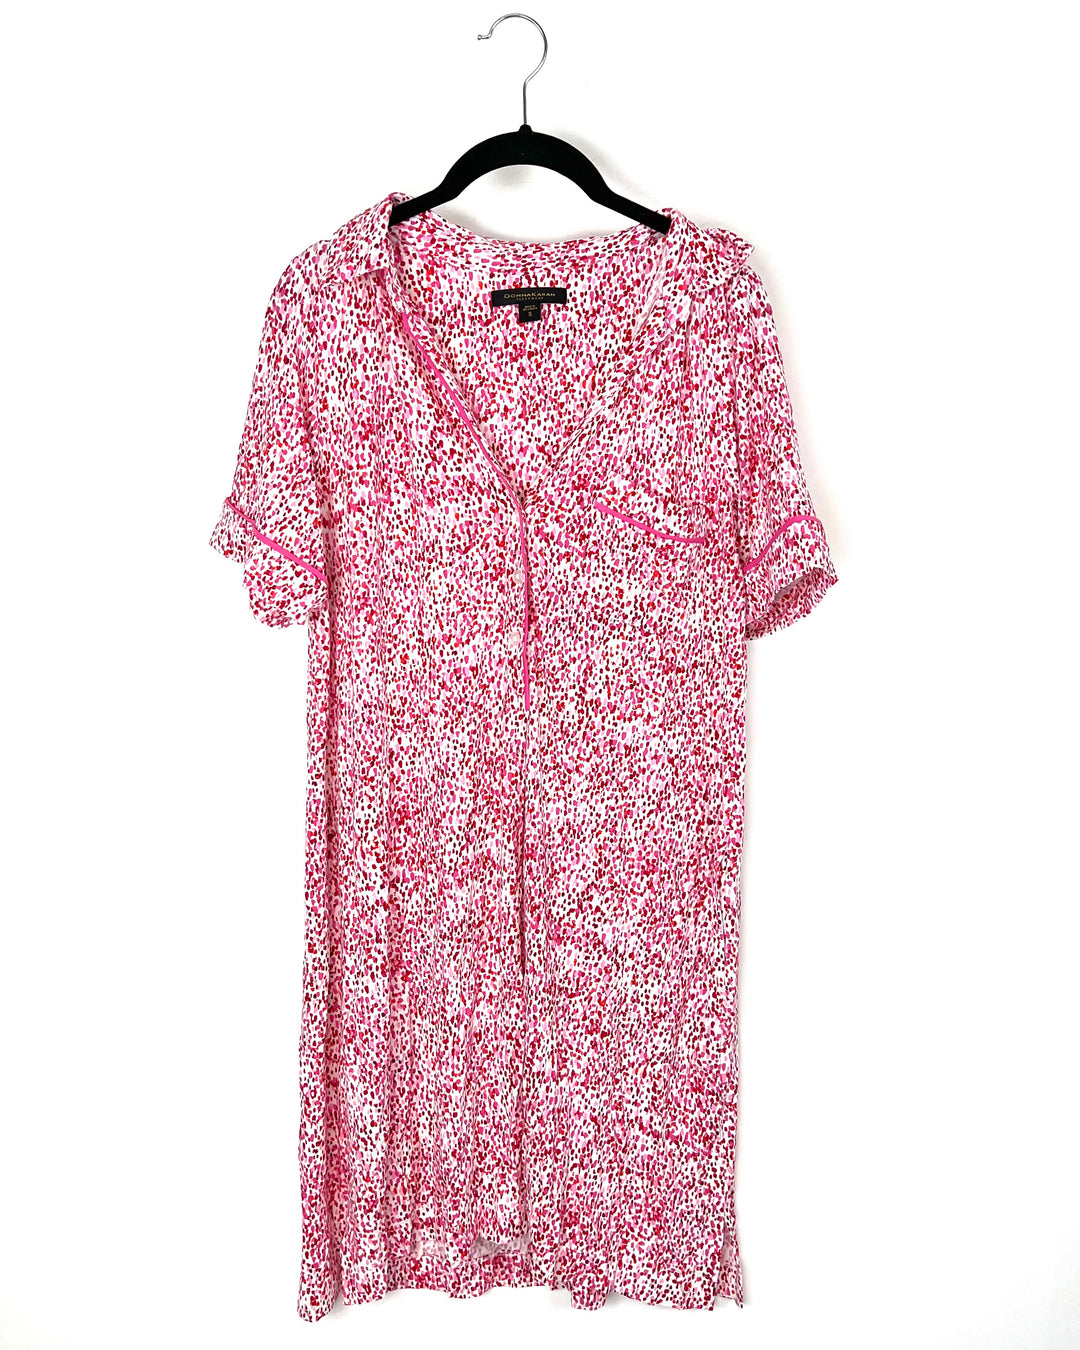 Pink and Red Spotted Nightgown - Small